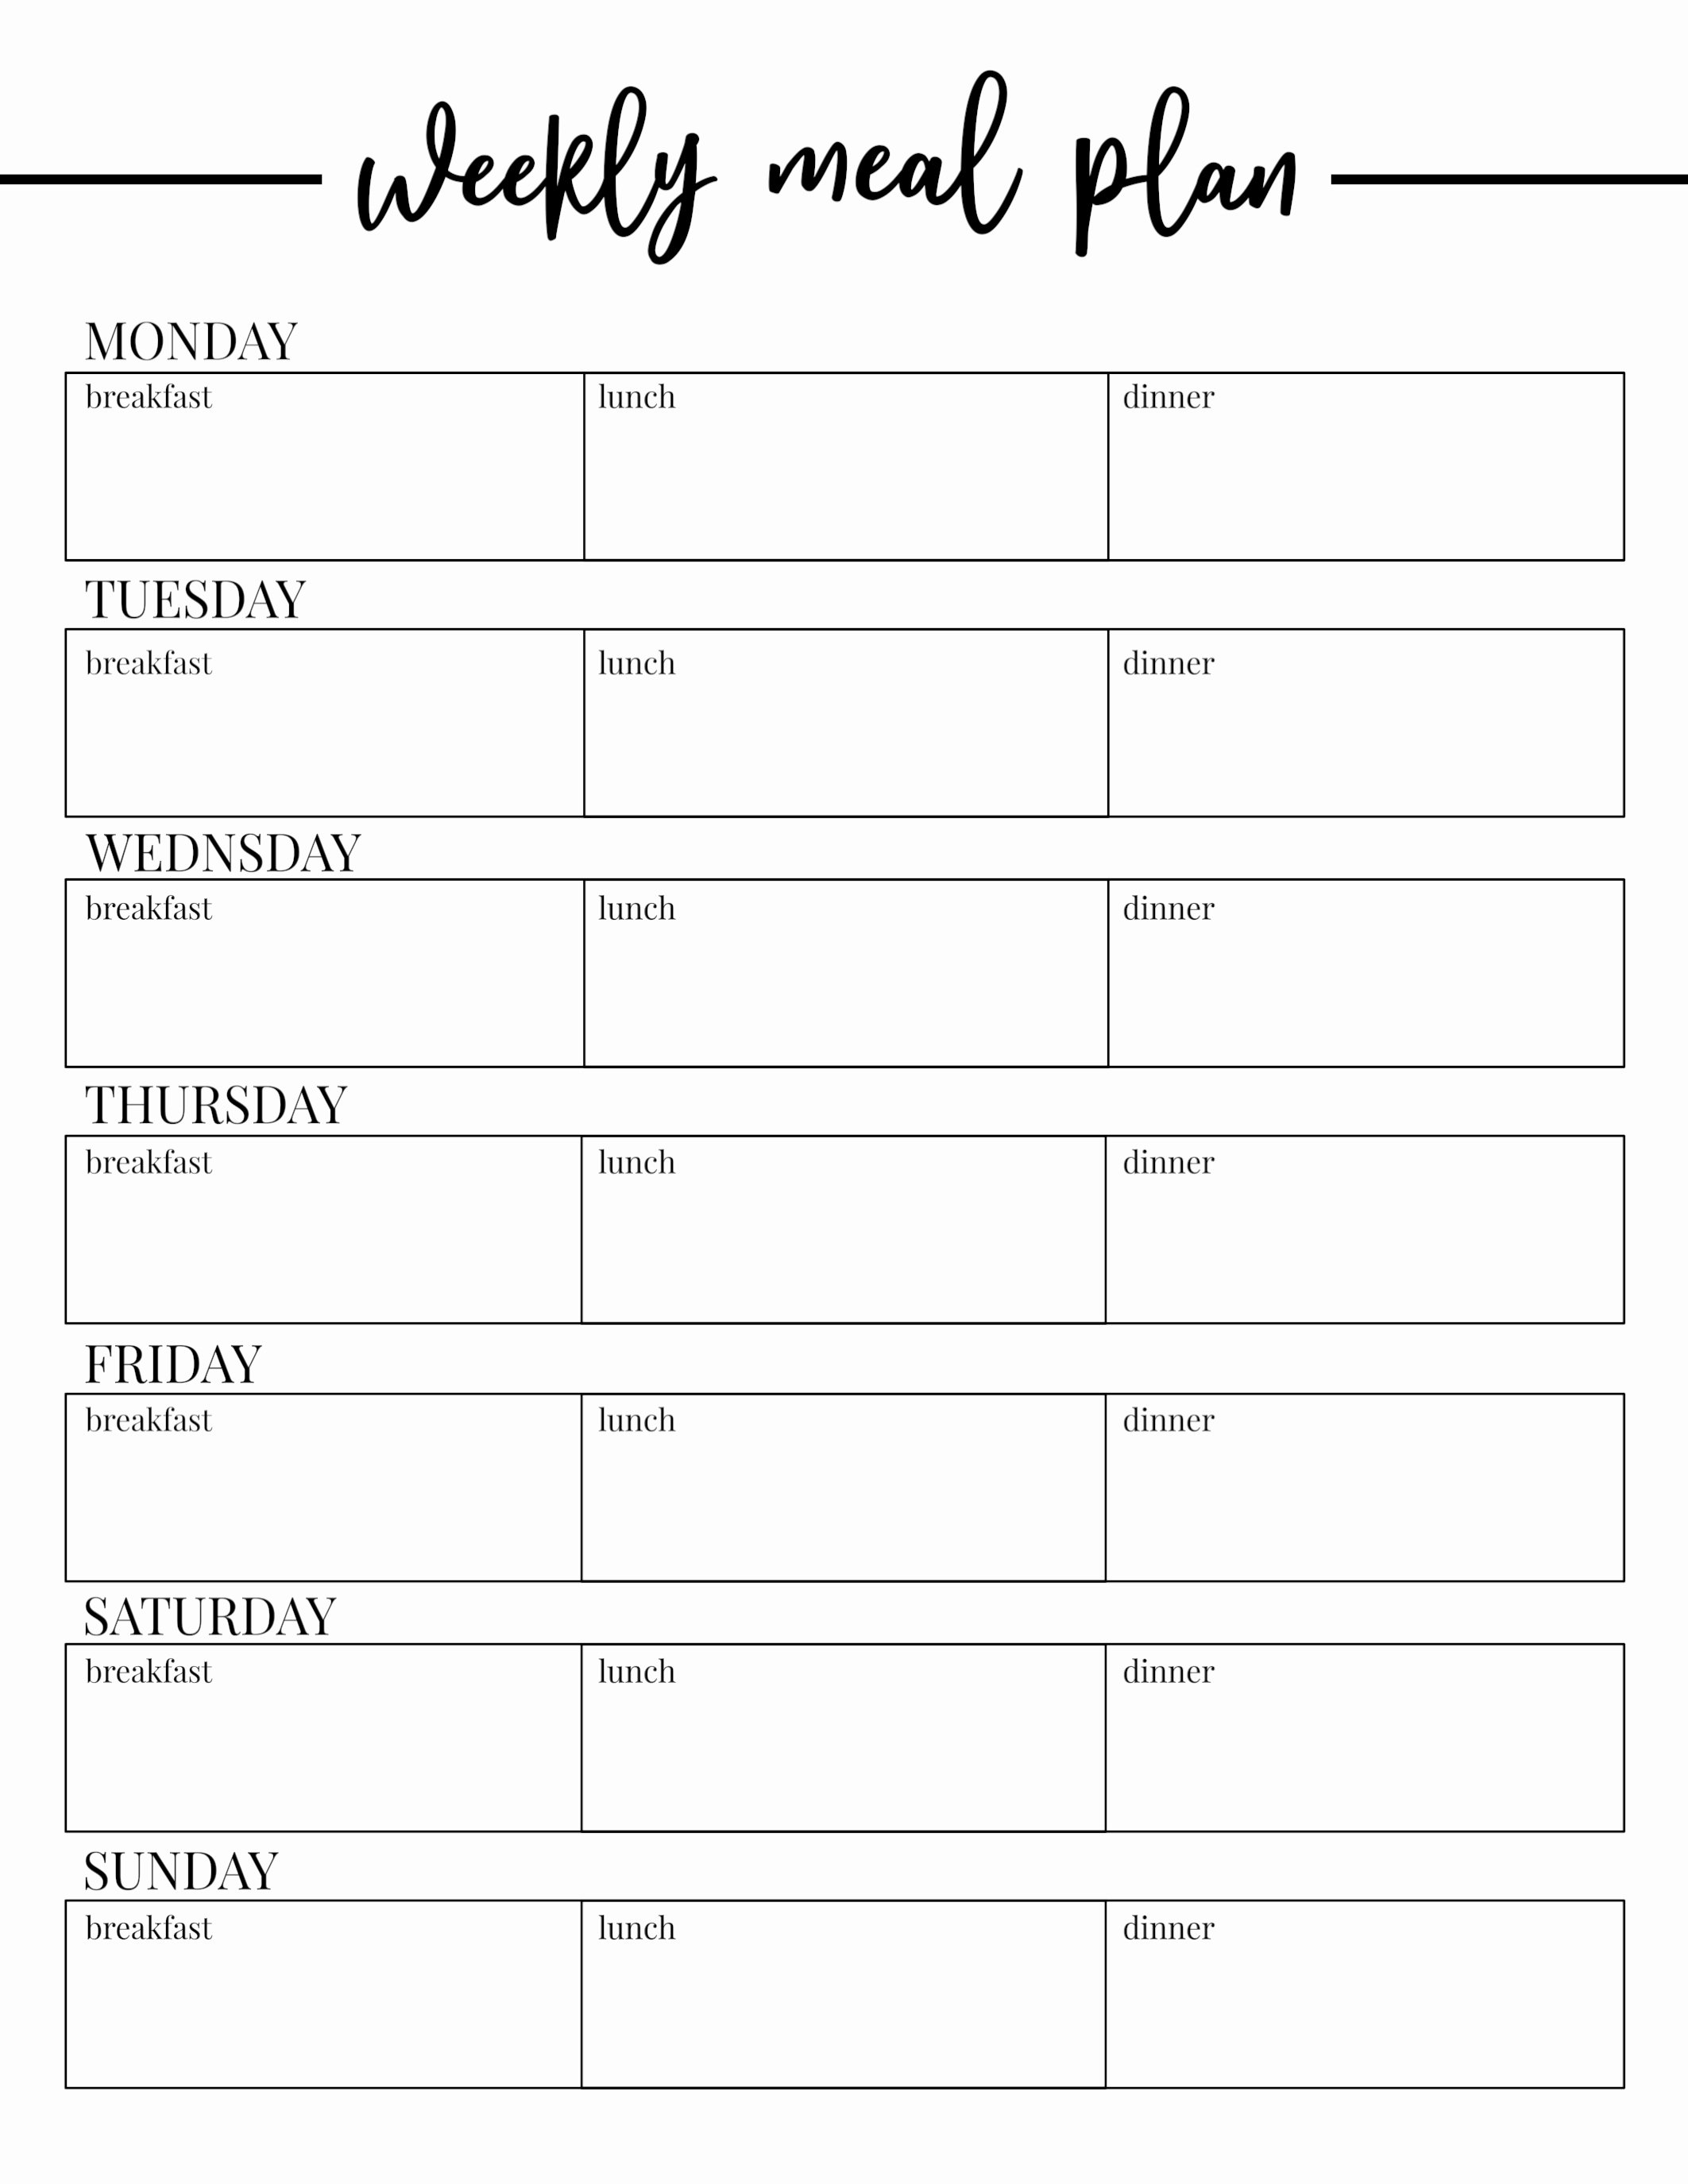 Free Meal Plan Template Best Of Free Printable Weekly Meal Plan Template Paper Trail Design